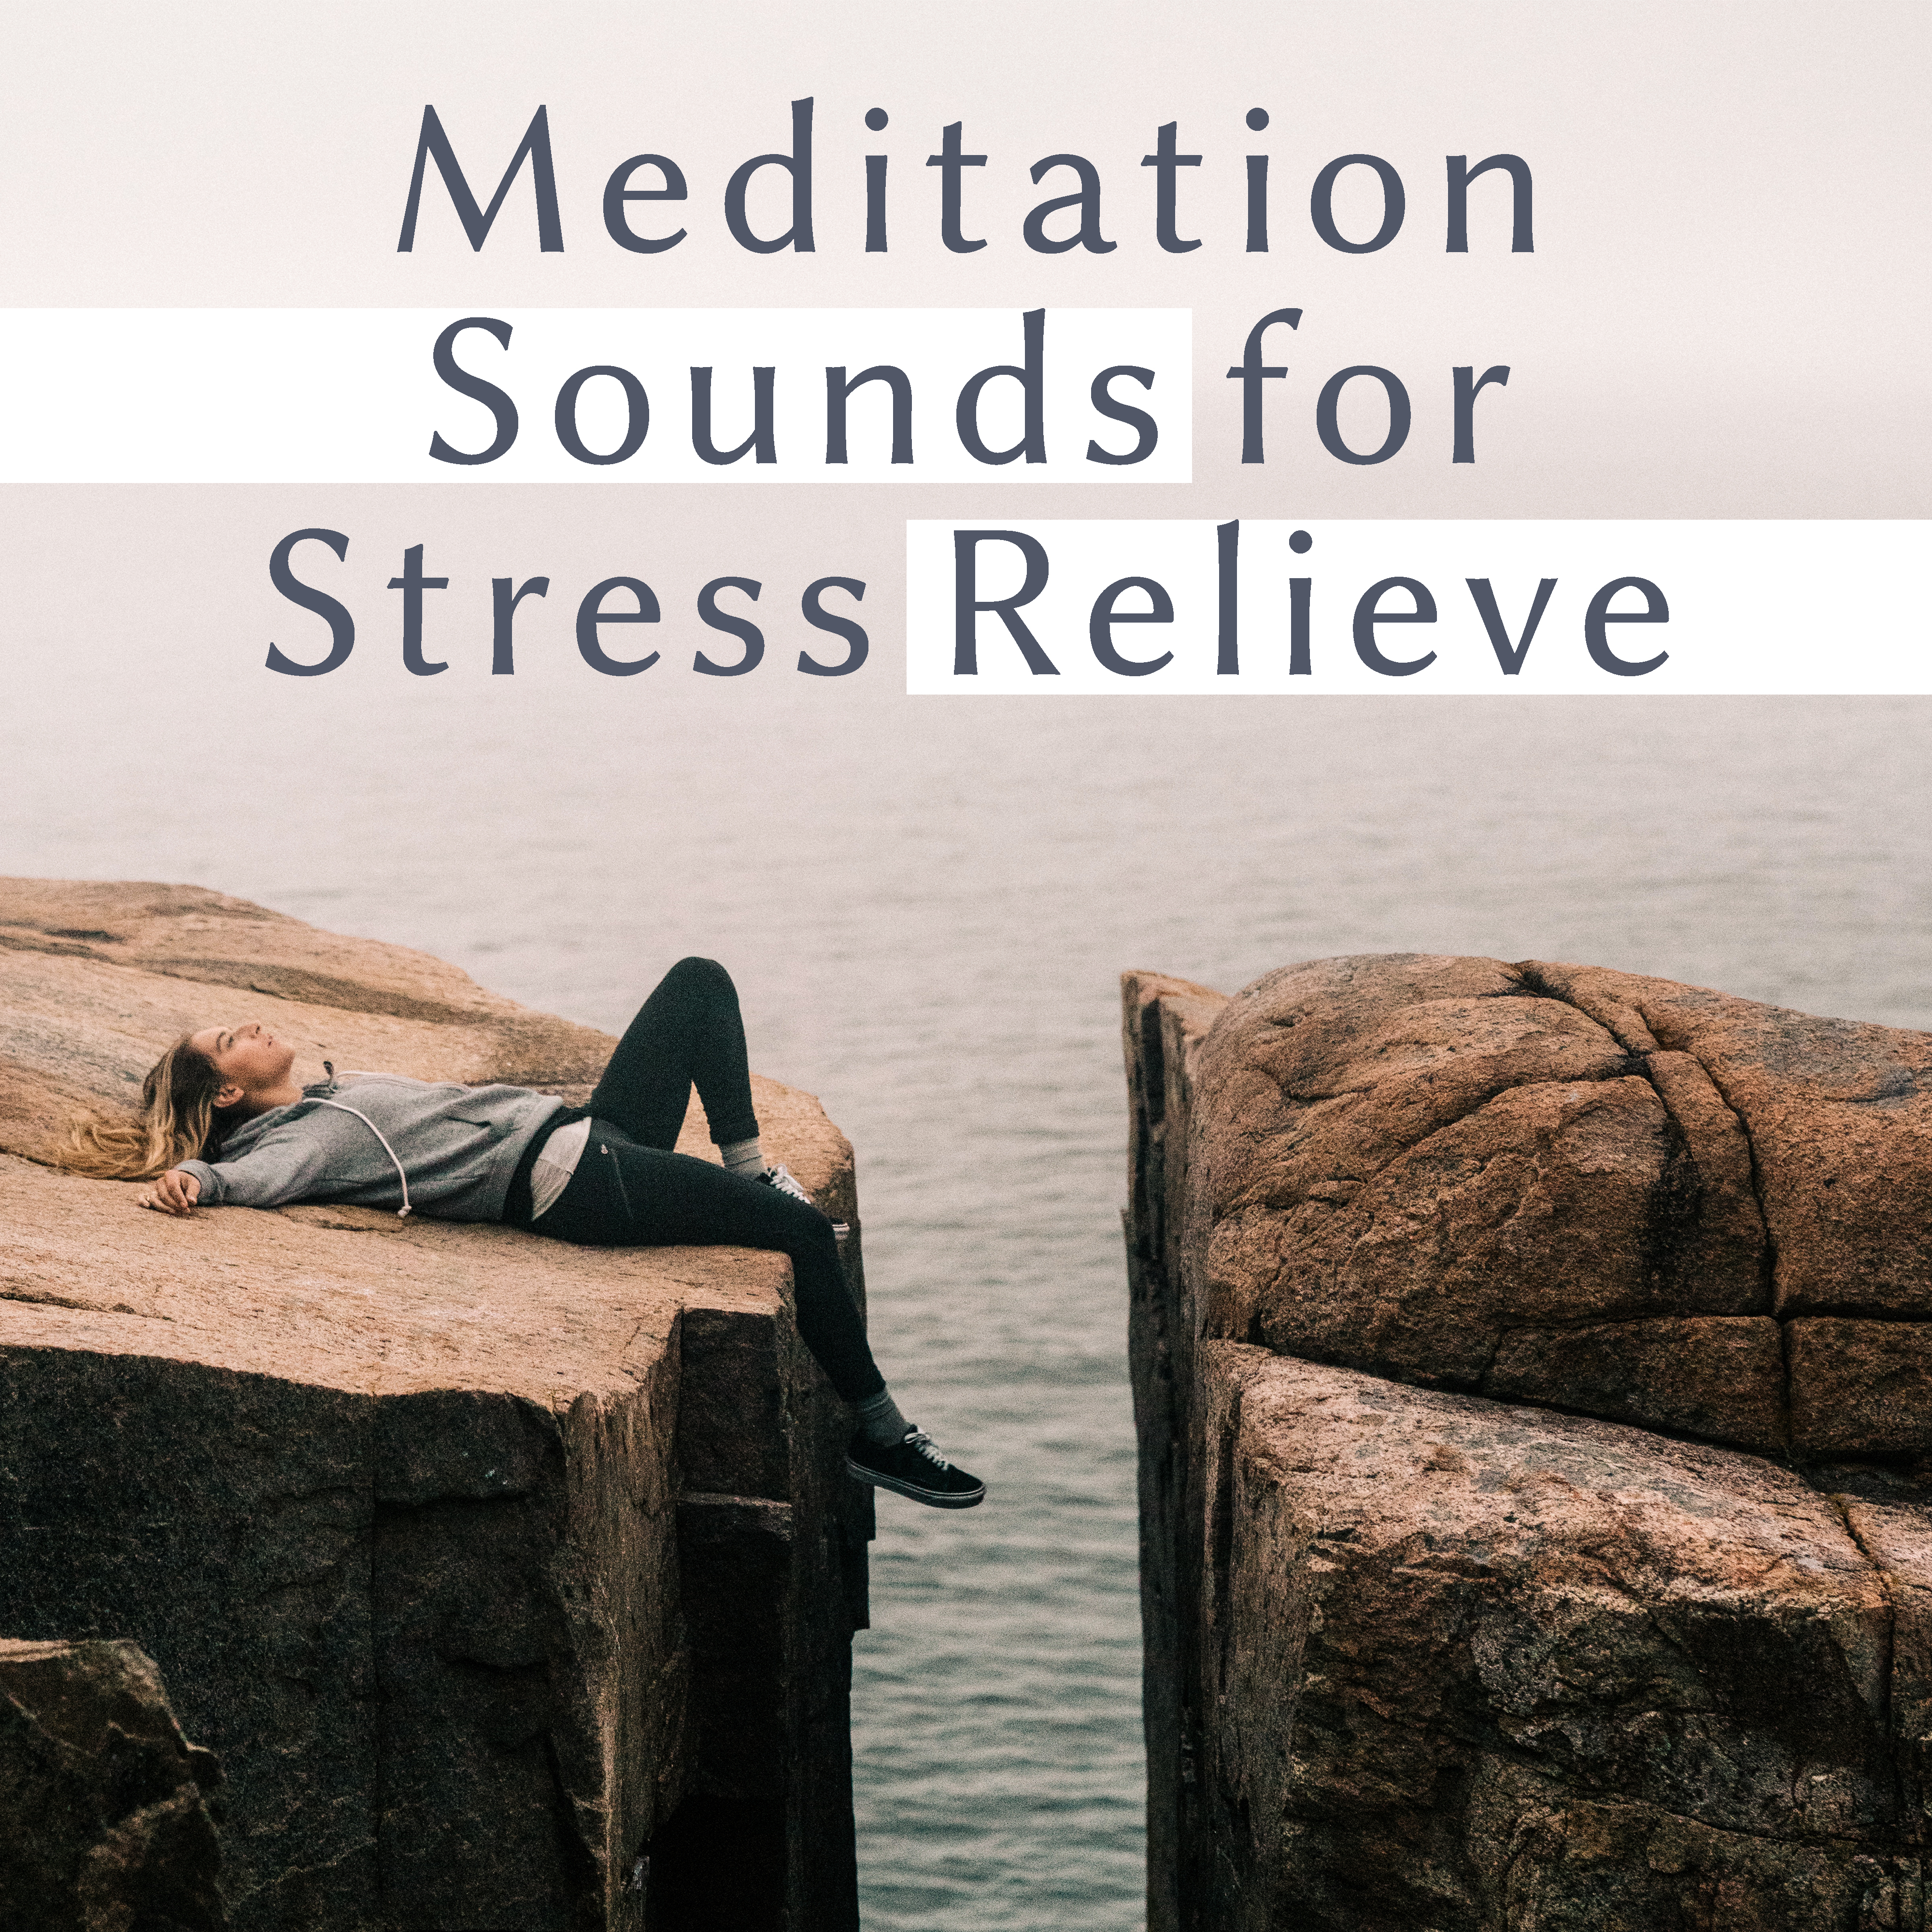 Meditation Sounds for Stress Relieve – Calm Music to Relax, Healing Therapy, Buddha Lounge, Stress Relief